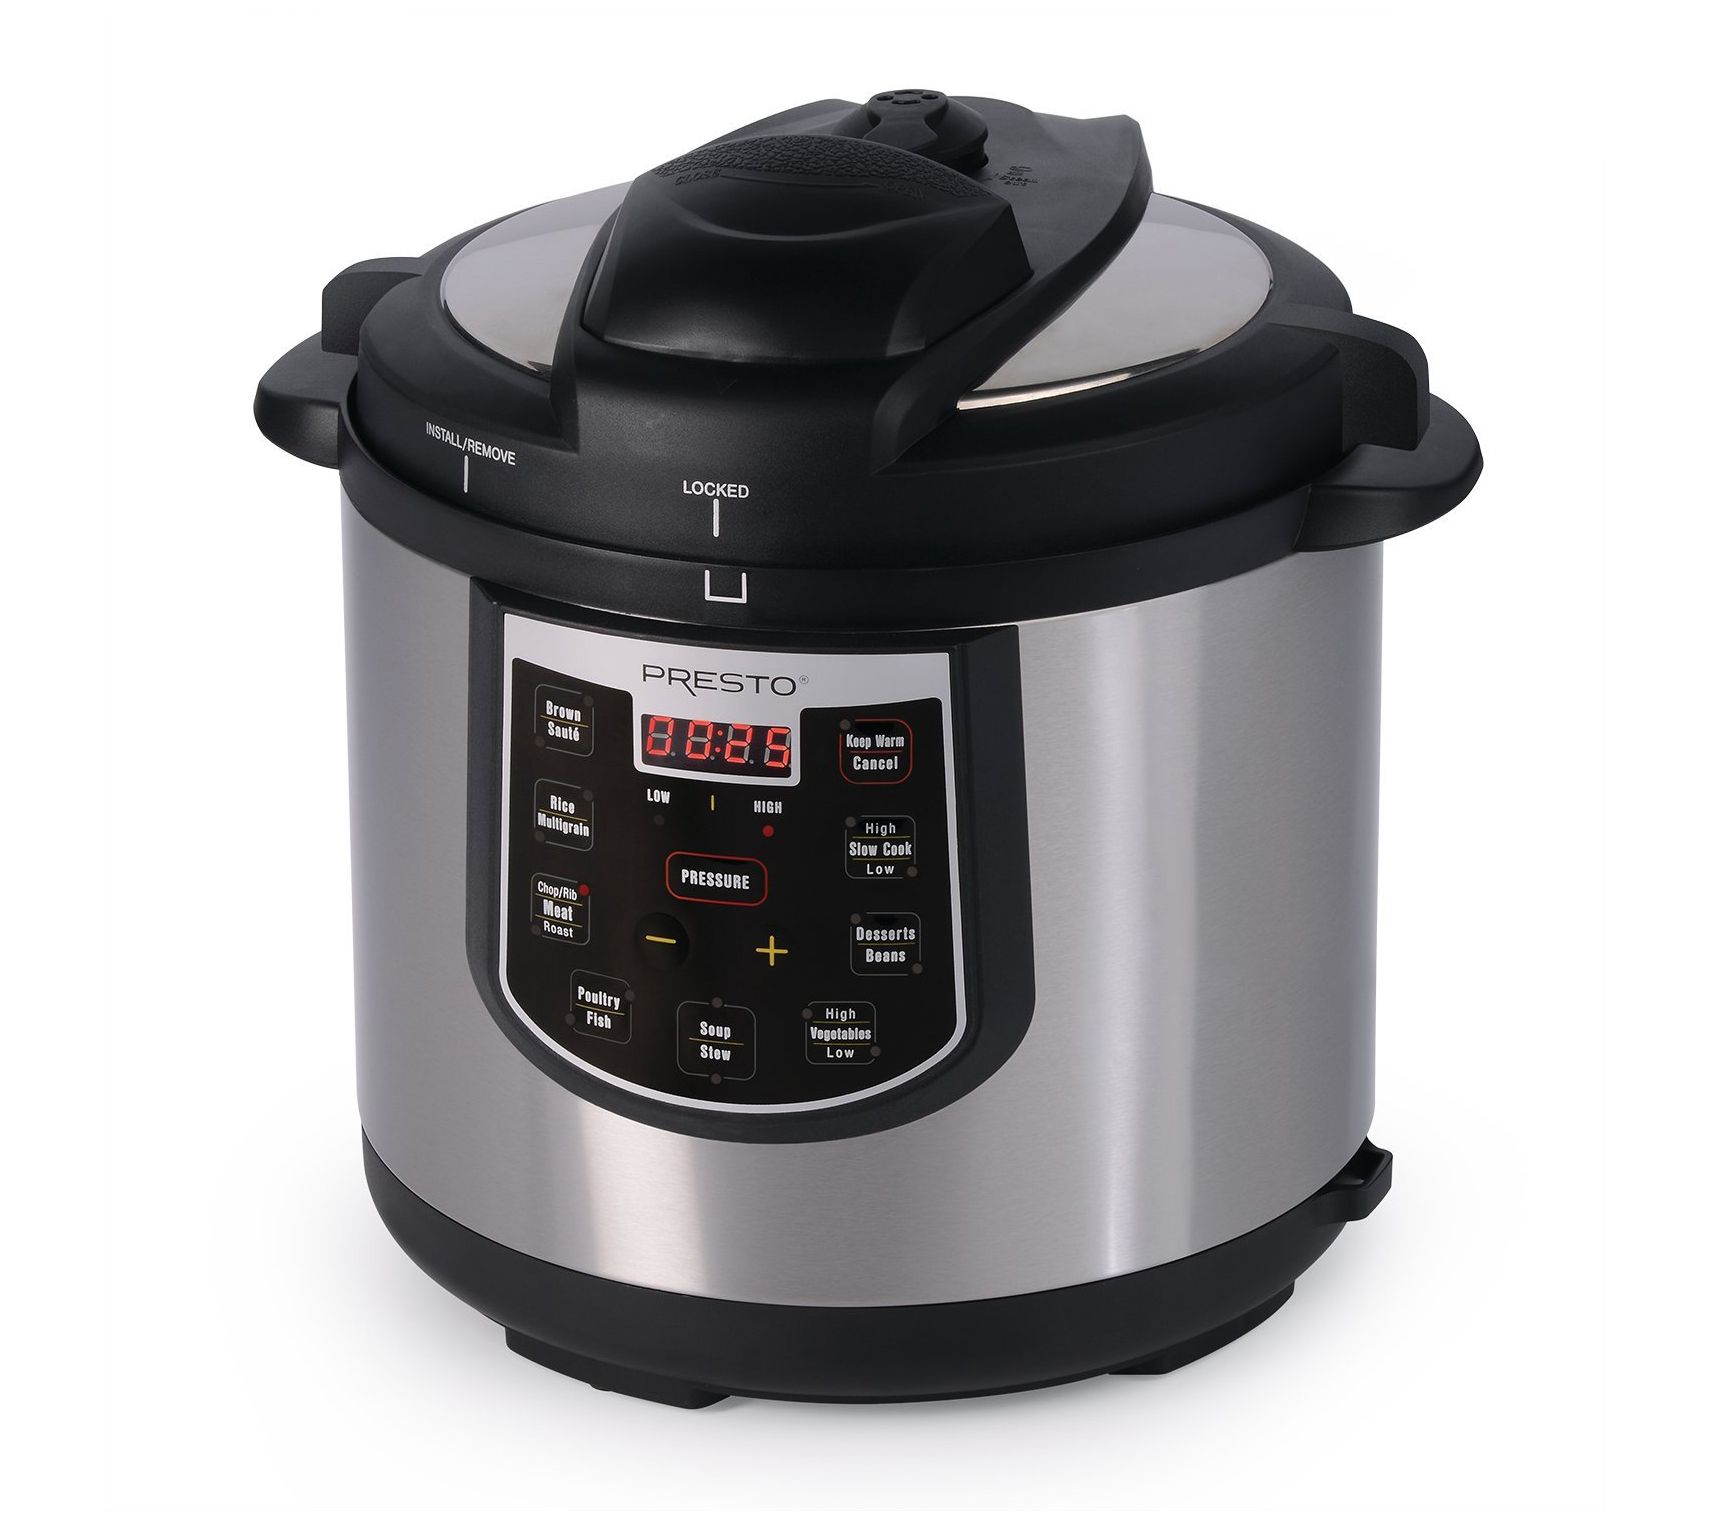 Instant Pot 6qt Duo Plus 9-in-1 Electric Pressure Cooker Pressure Cooker on  QVC 